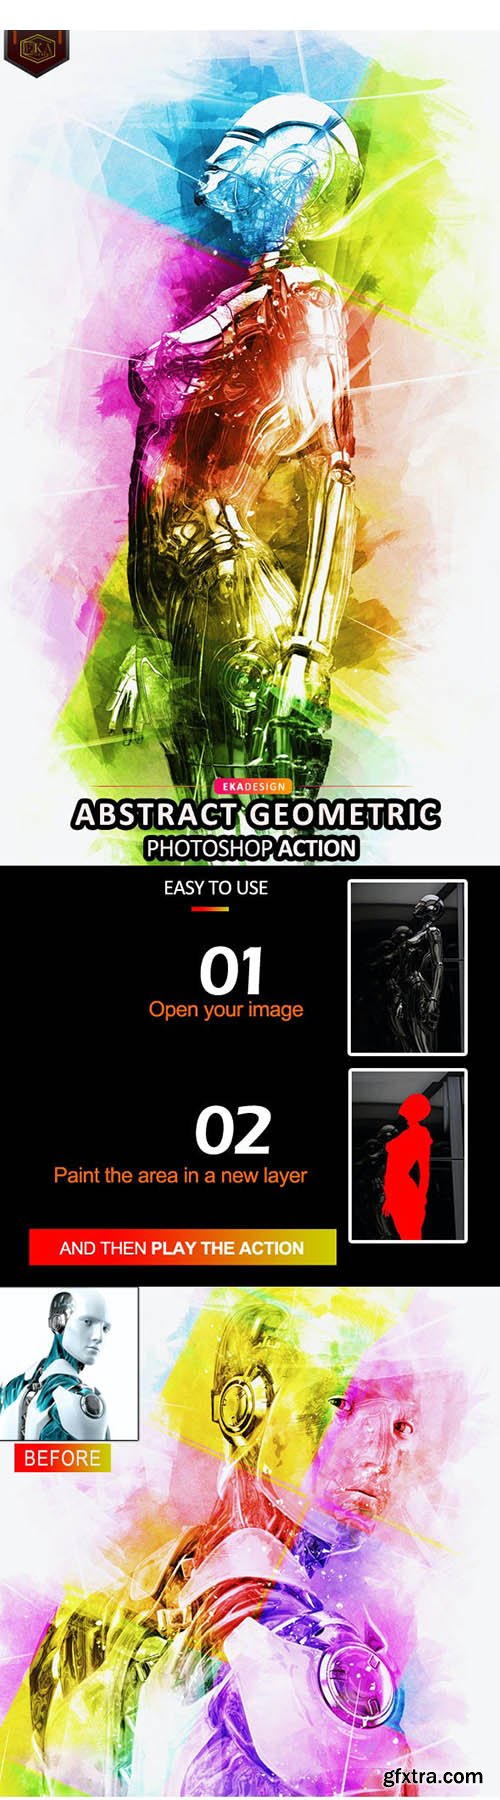 GraphicRiver - Abstract Geometric Photoshop Action 35393447